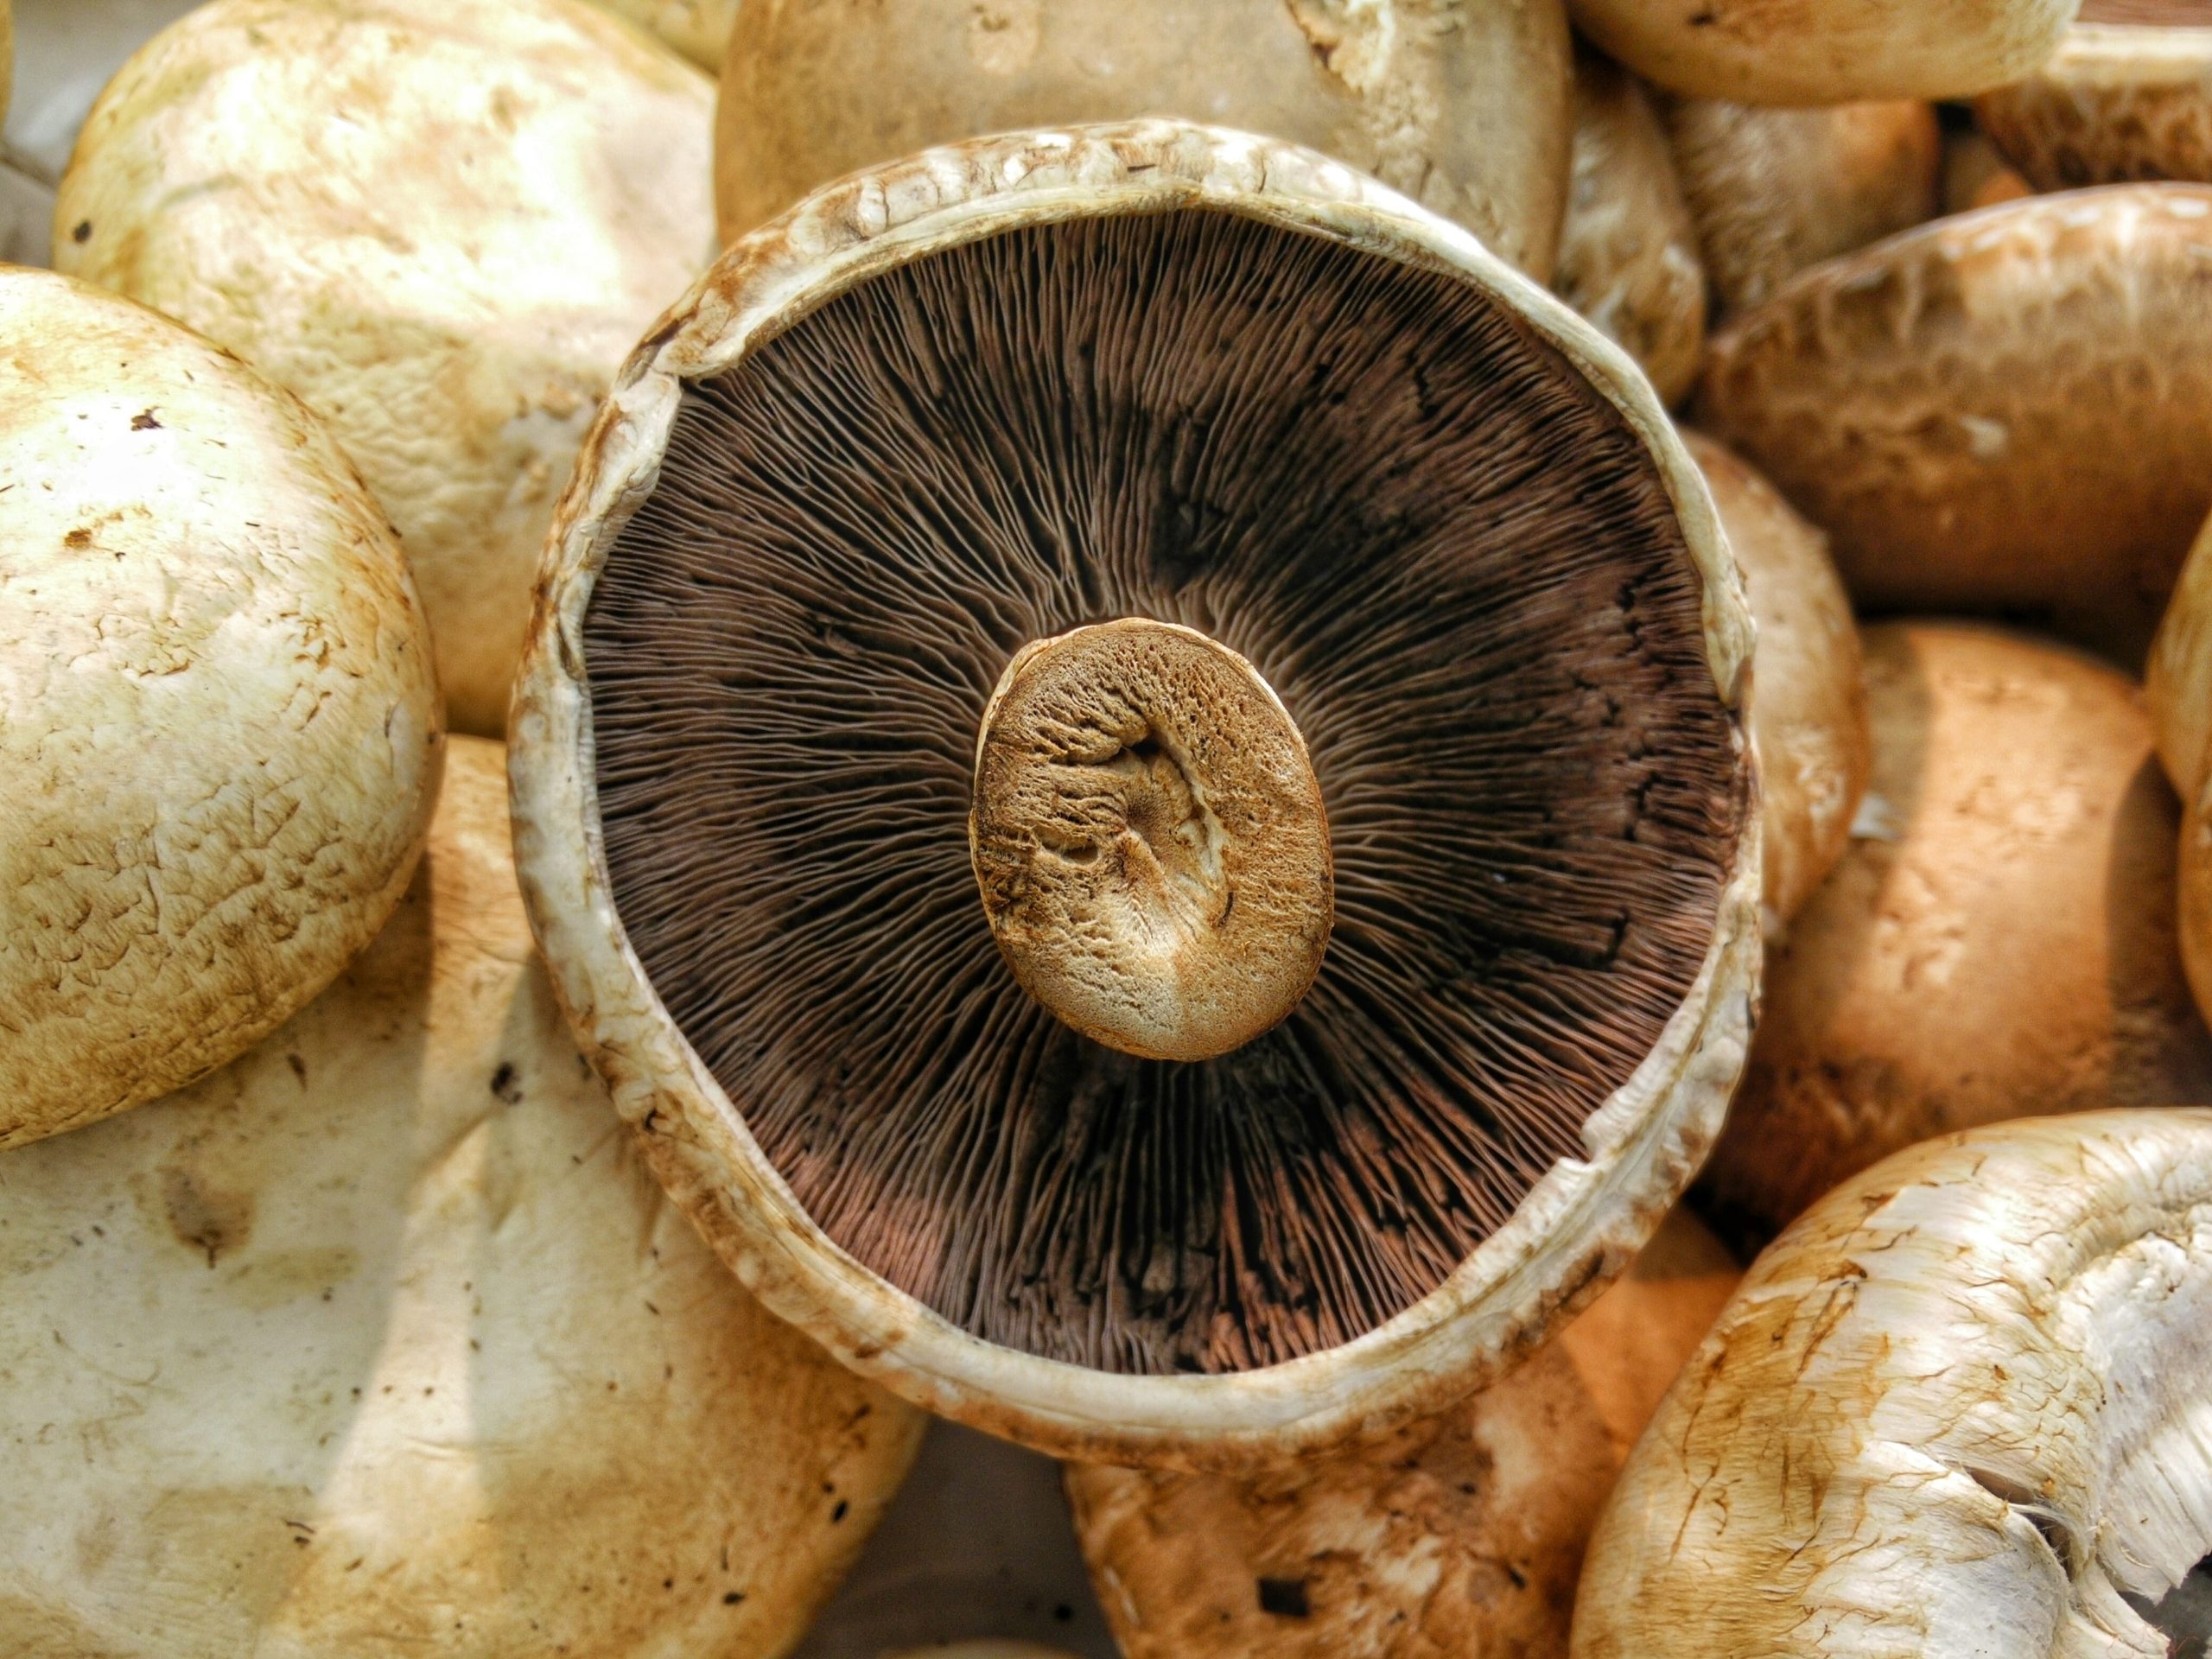 Fight Wrinkles, Keep Your Heart Happy & More: Top Health Benefits of Mushrooms